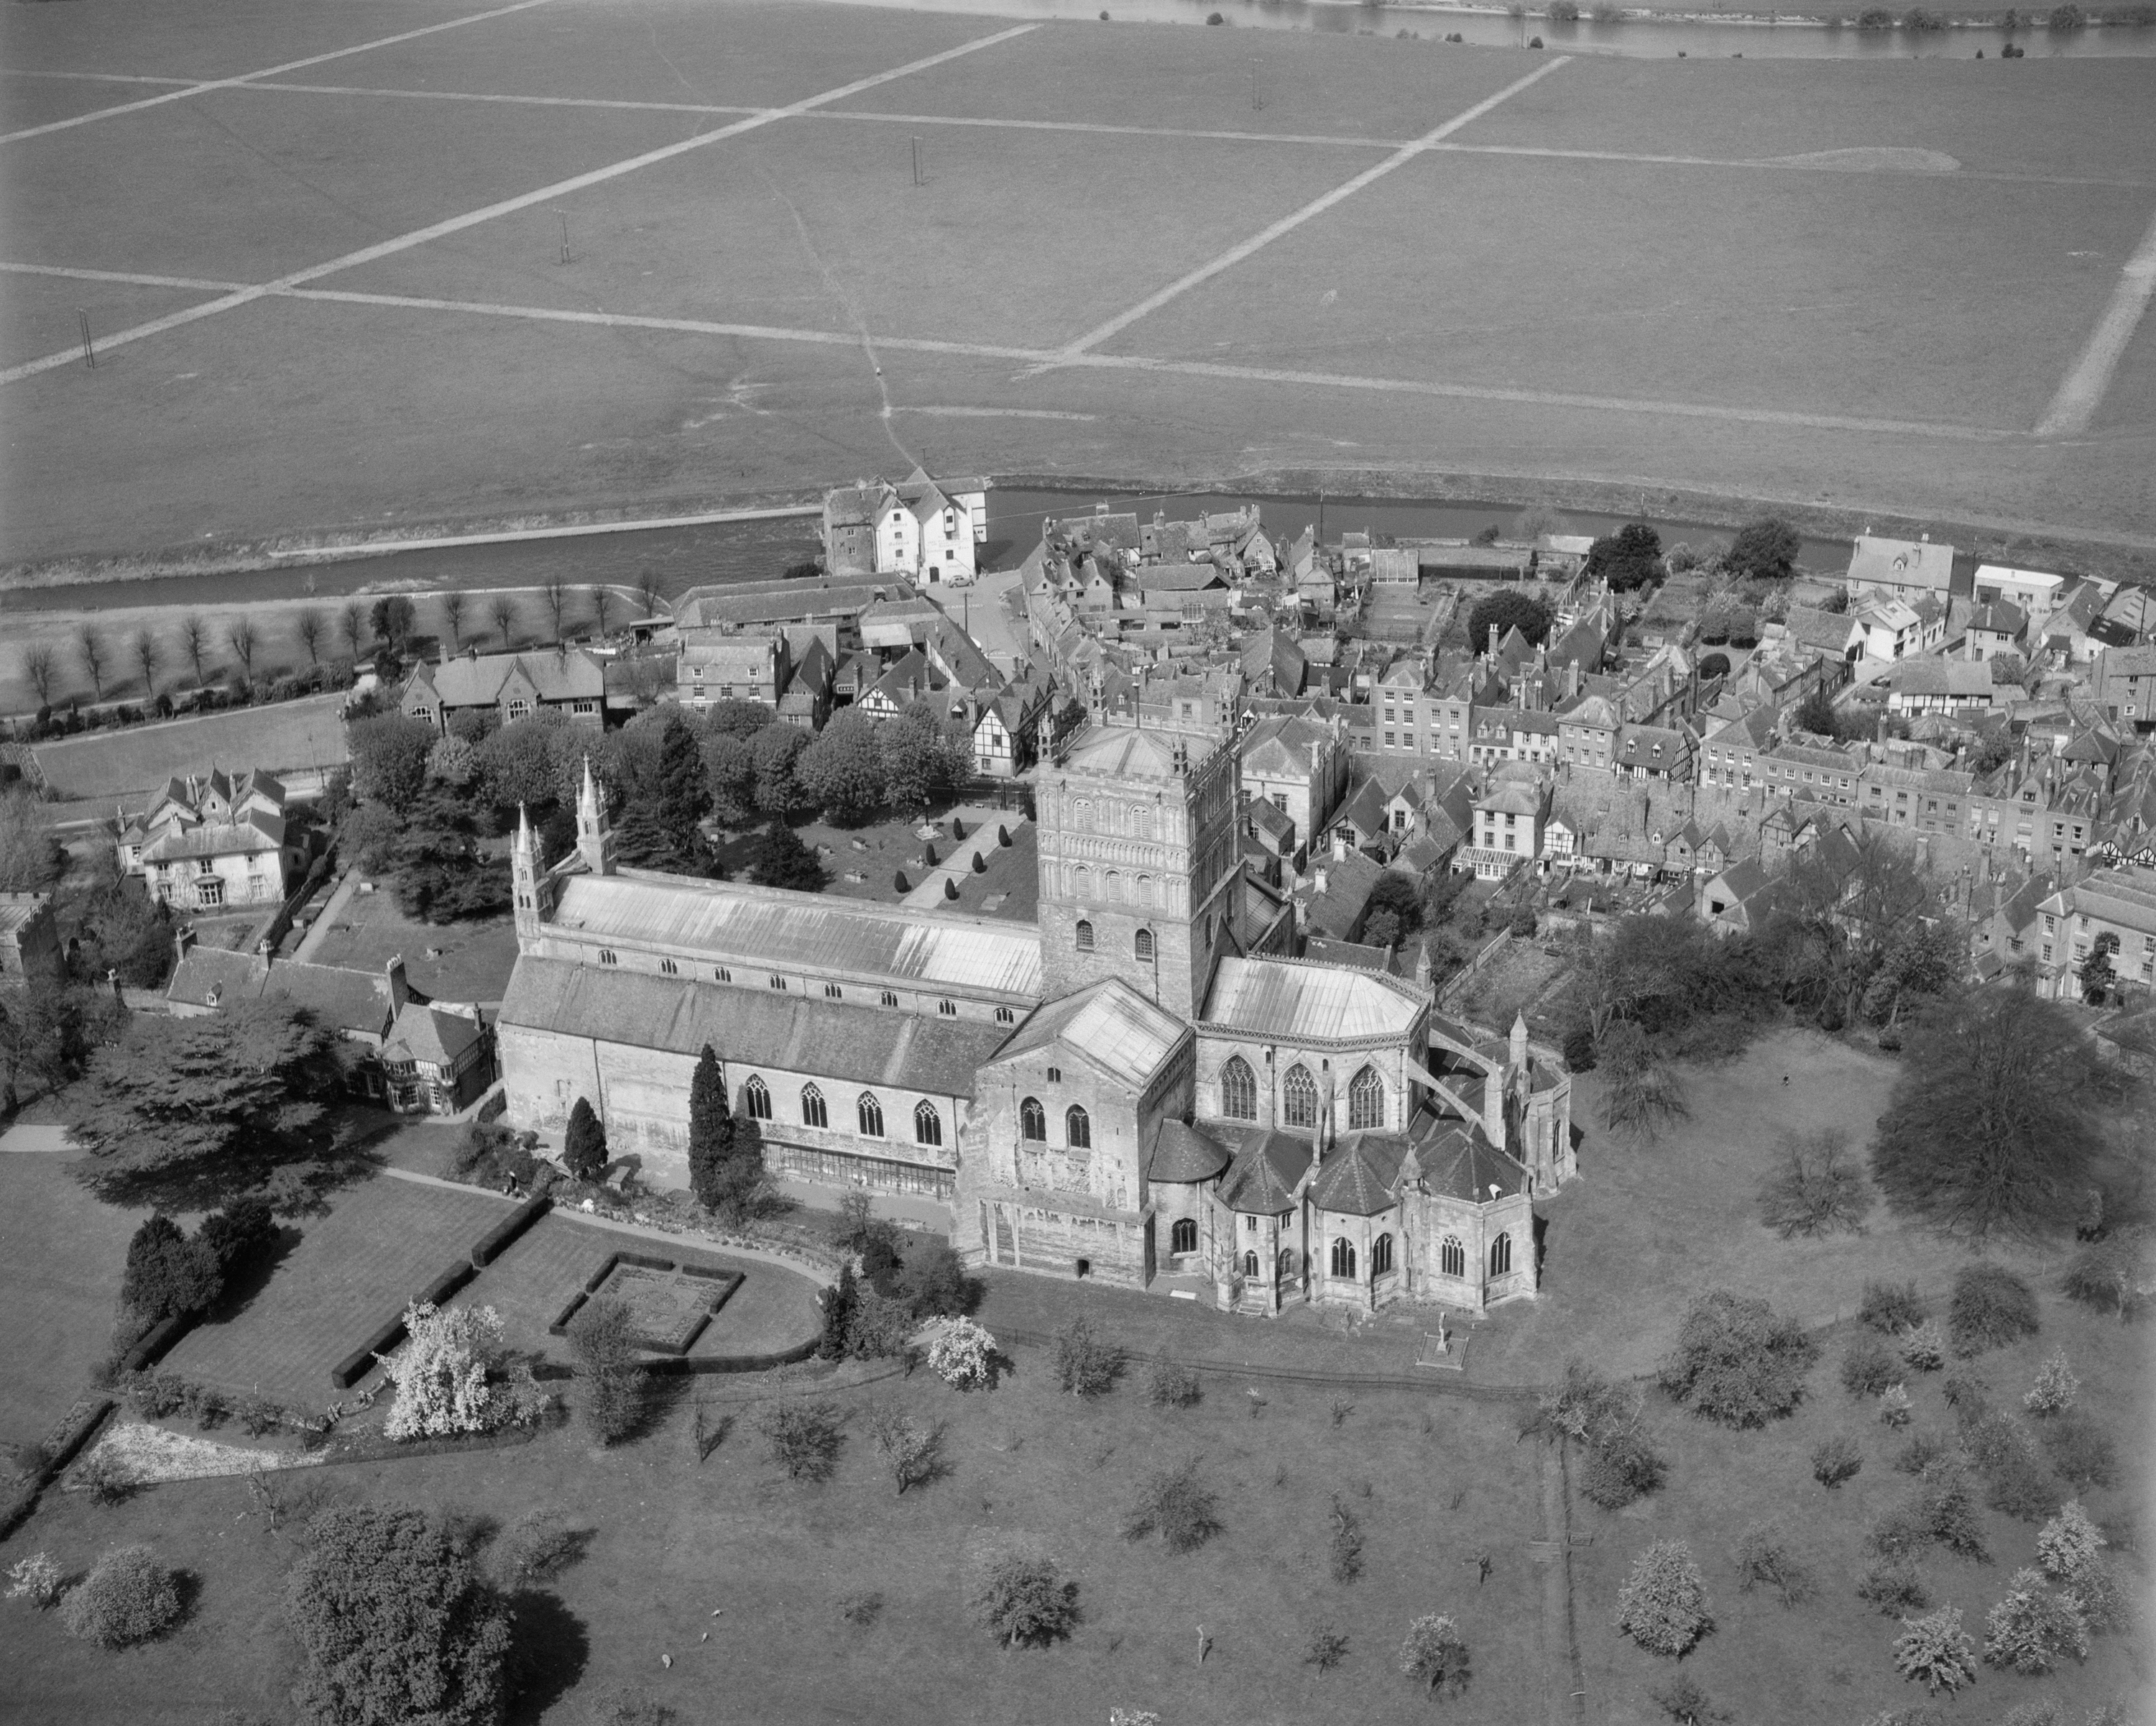 Wingham photographed Tewkesbury Abbey in 1951 (Historic England Archive/Harold Wingham Collection/PA)